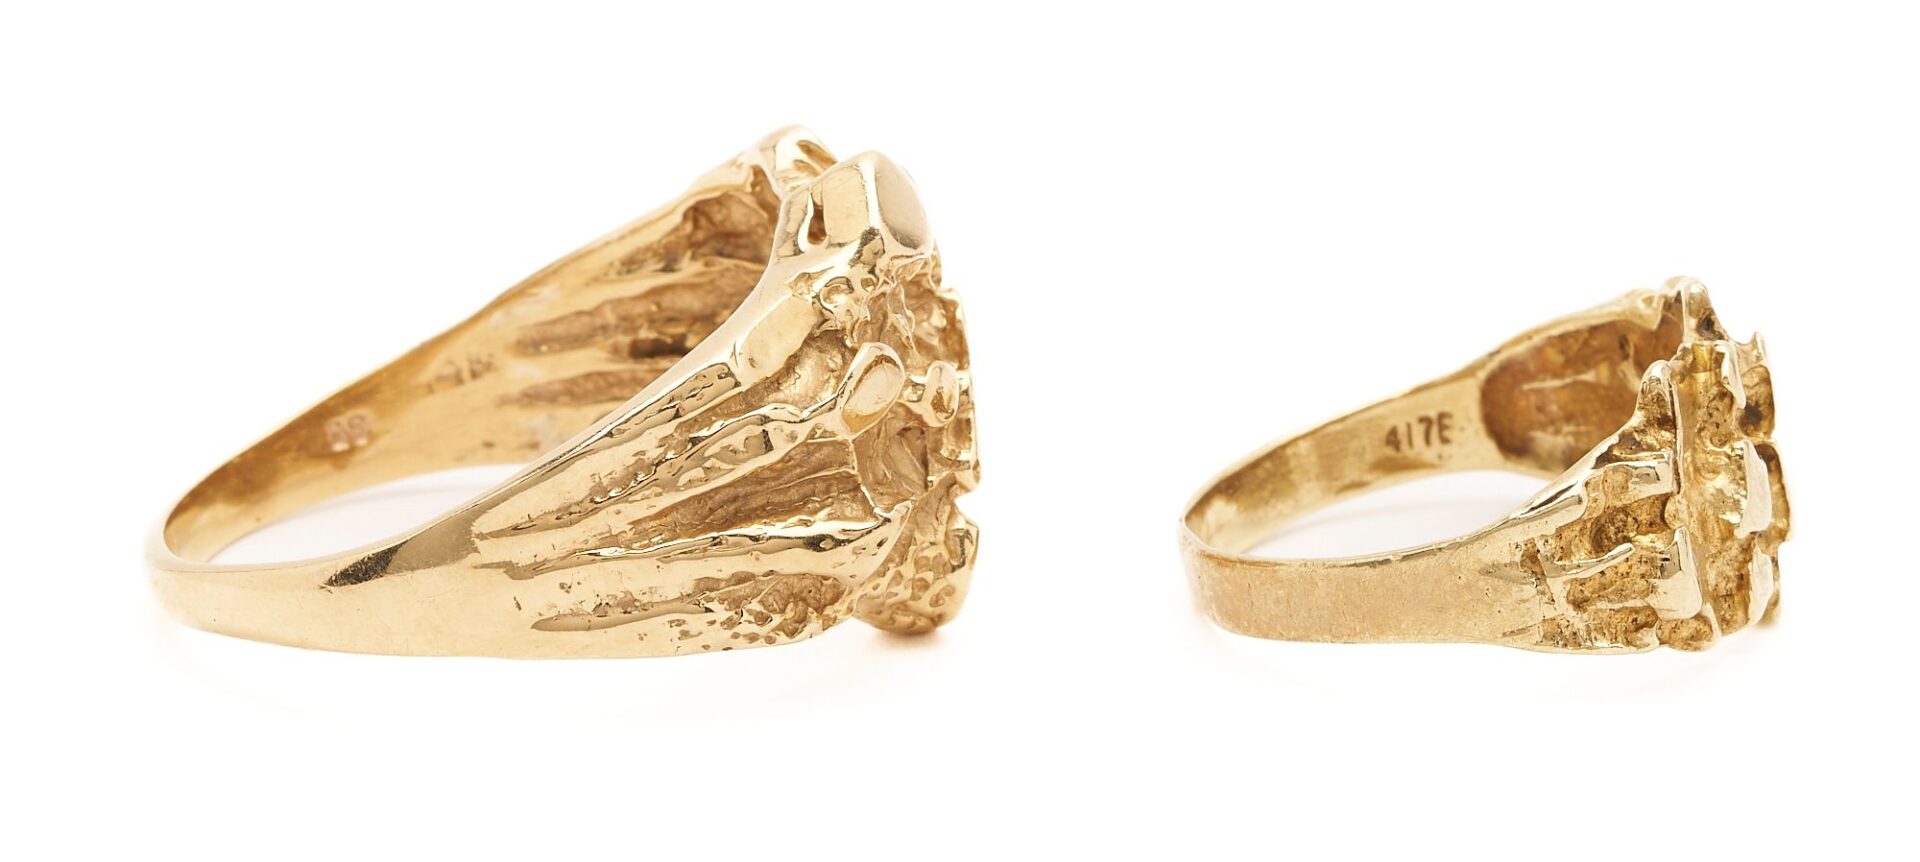 Lot 855: Two (2) Gold Nugget Rings – One 14K Gold & One 10K Gold